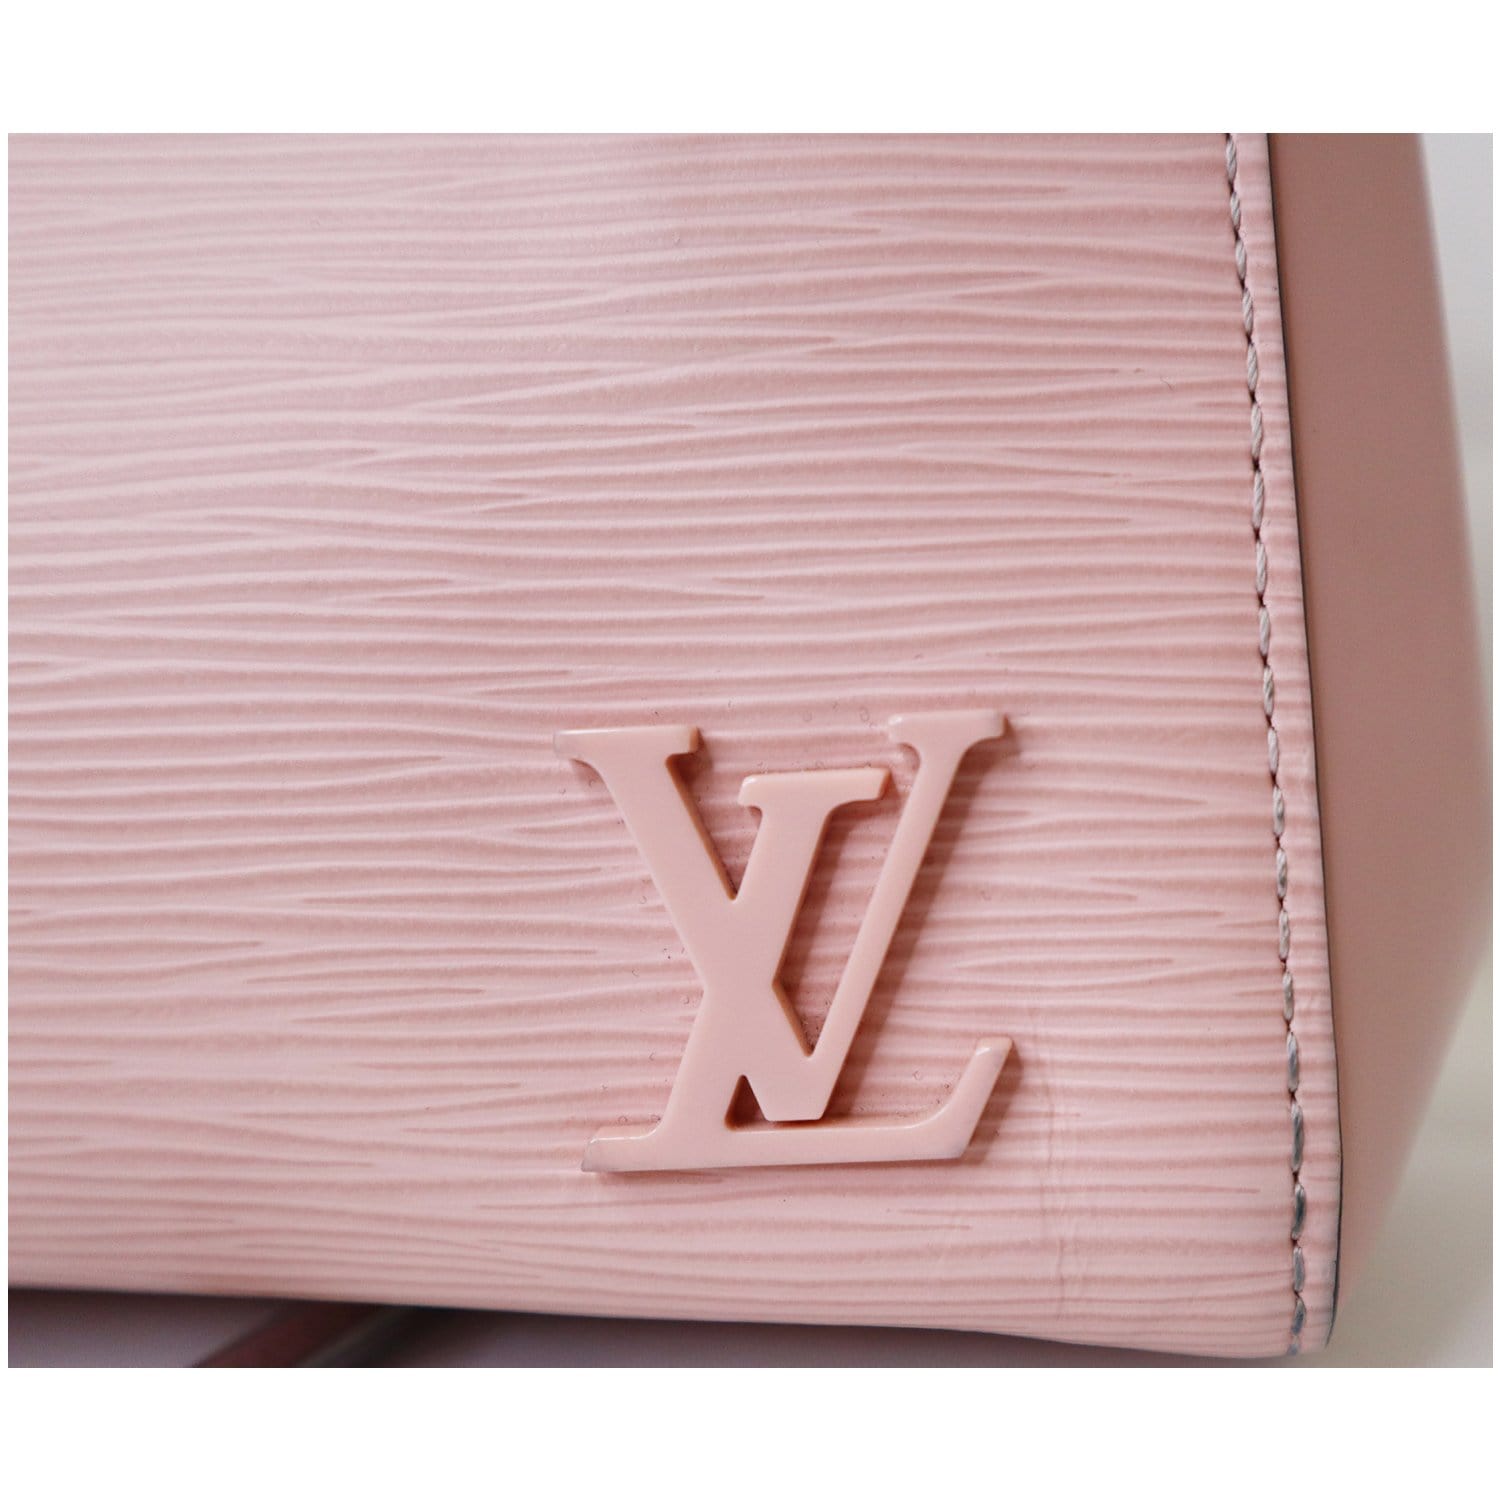 Pale pink Cluny BB bag in Epi leather Louis Vuitton Numbered